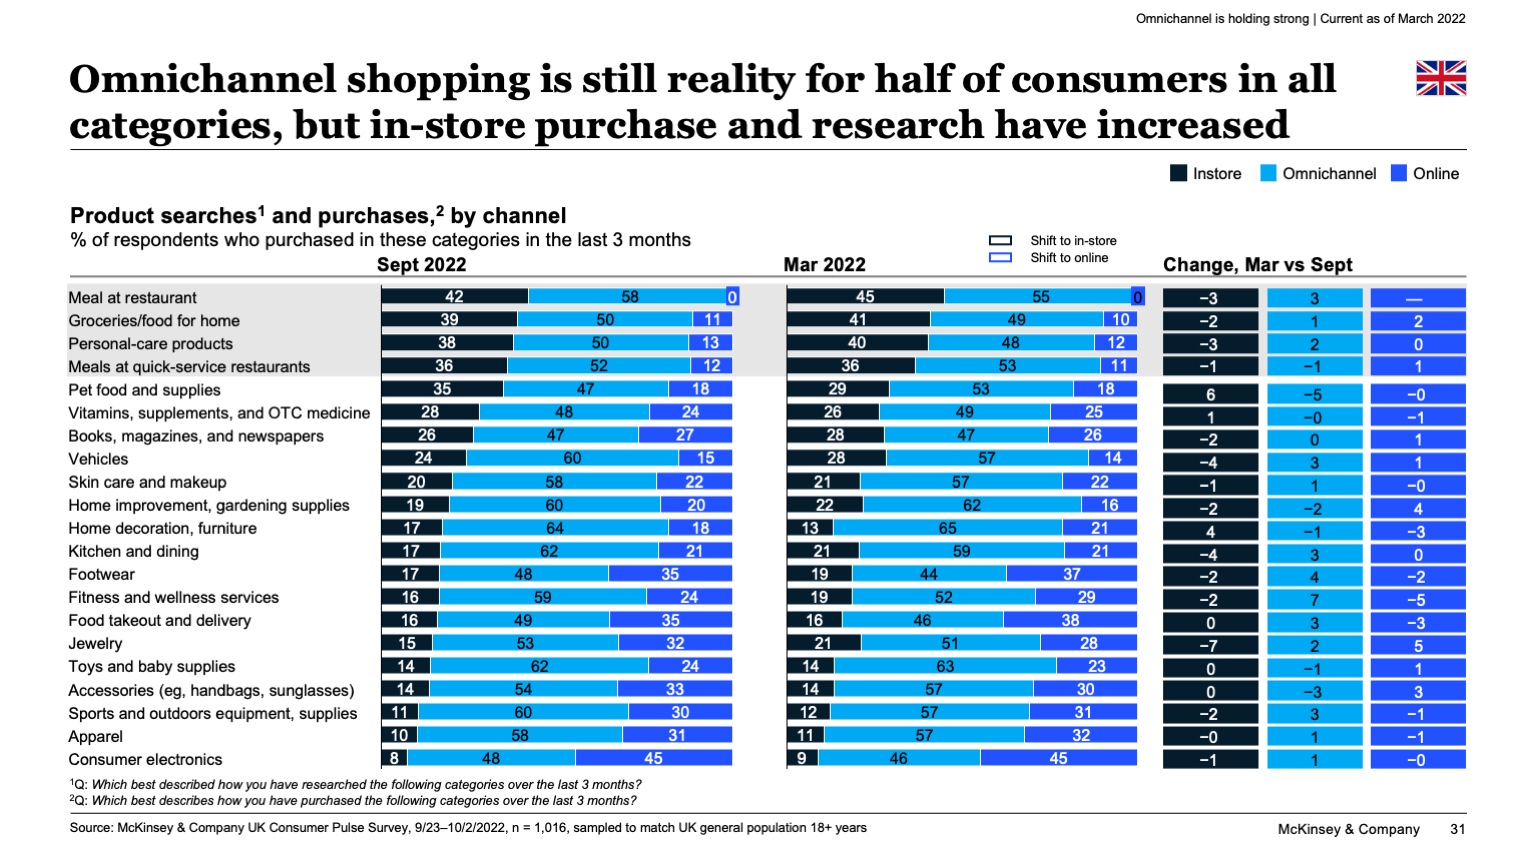 Omnichannel shopping is still reality for half of consumers in all categories, but in-store purchase and research have increased